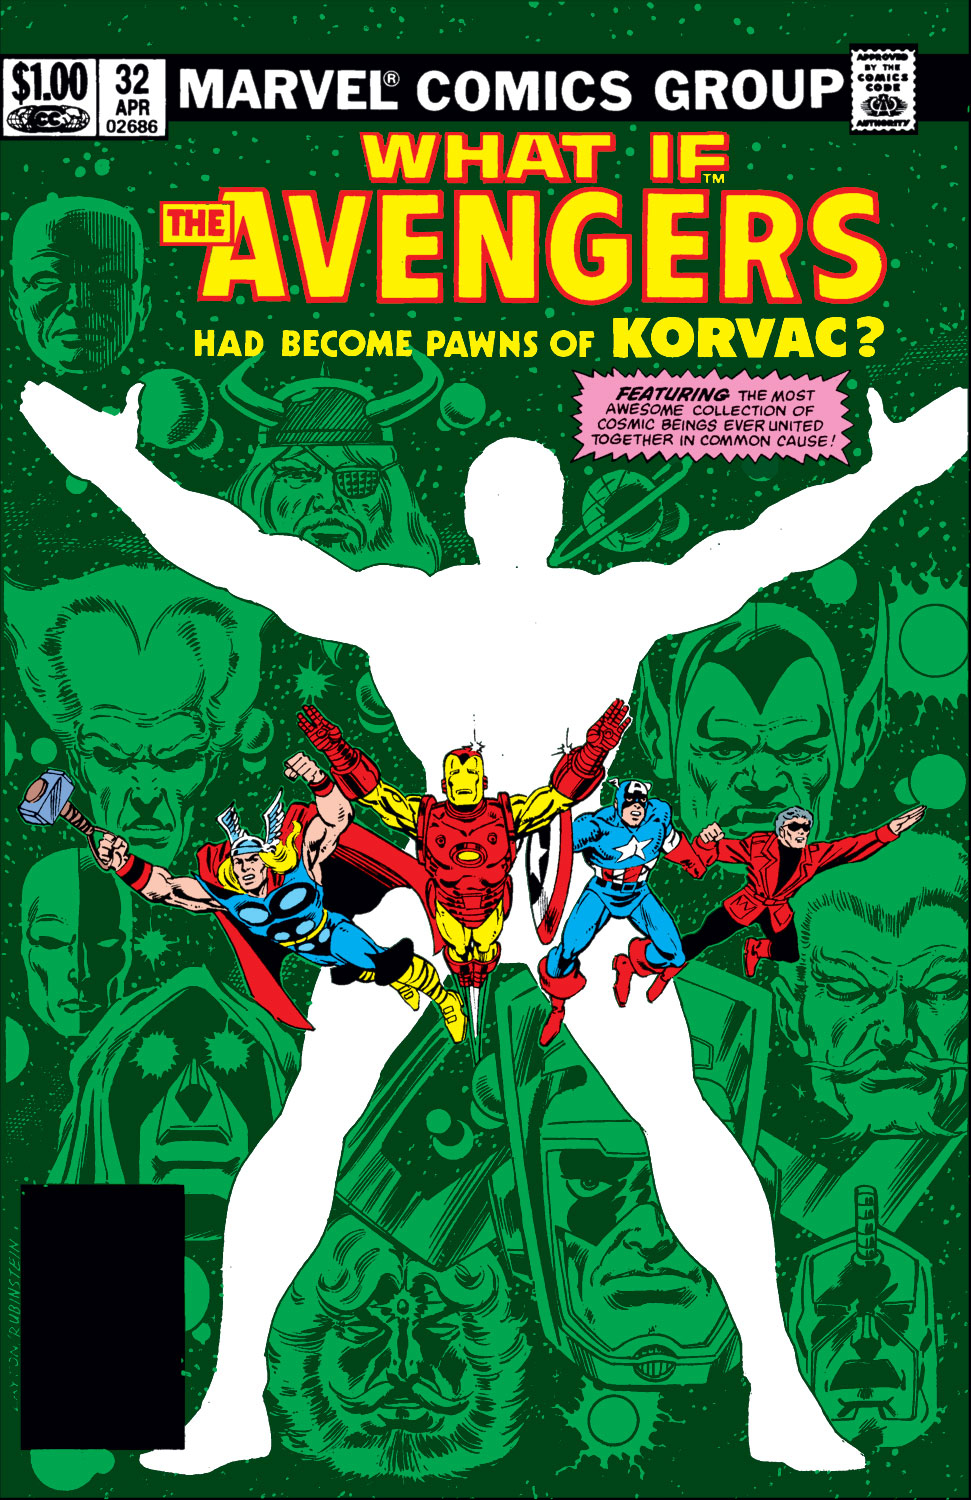 What If? (1977) issue 32 - The Avengers had become pawns of Korvac - Page 1